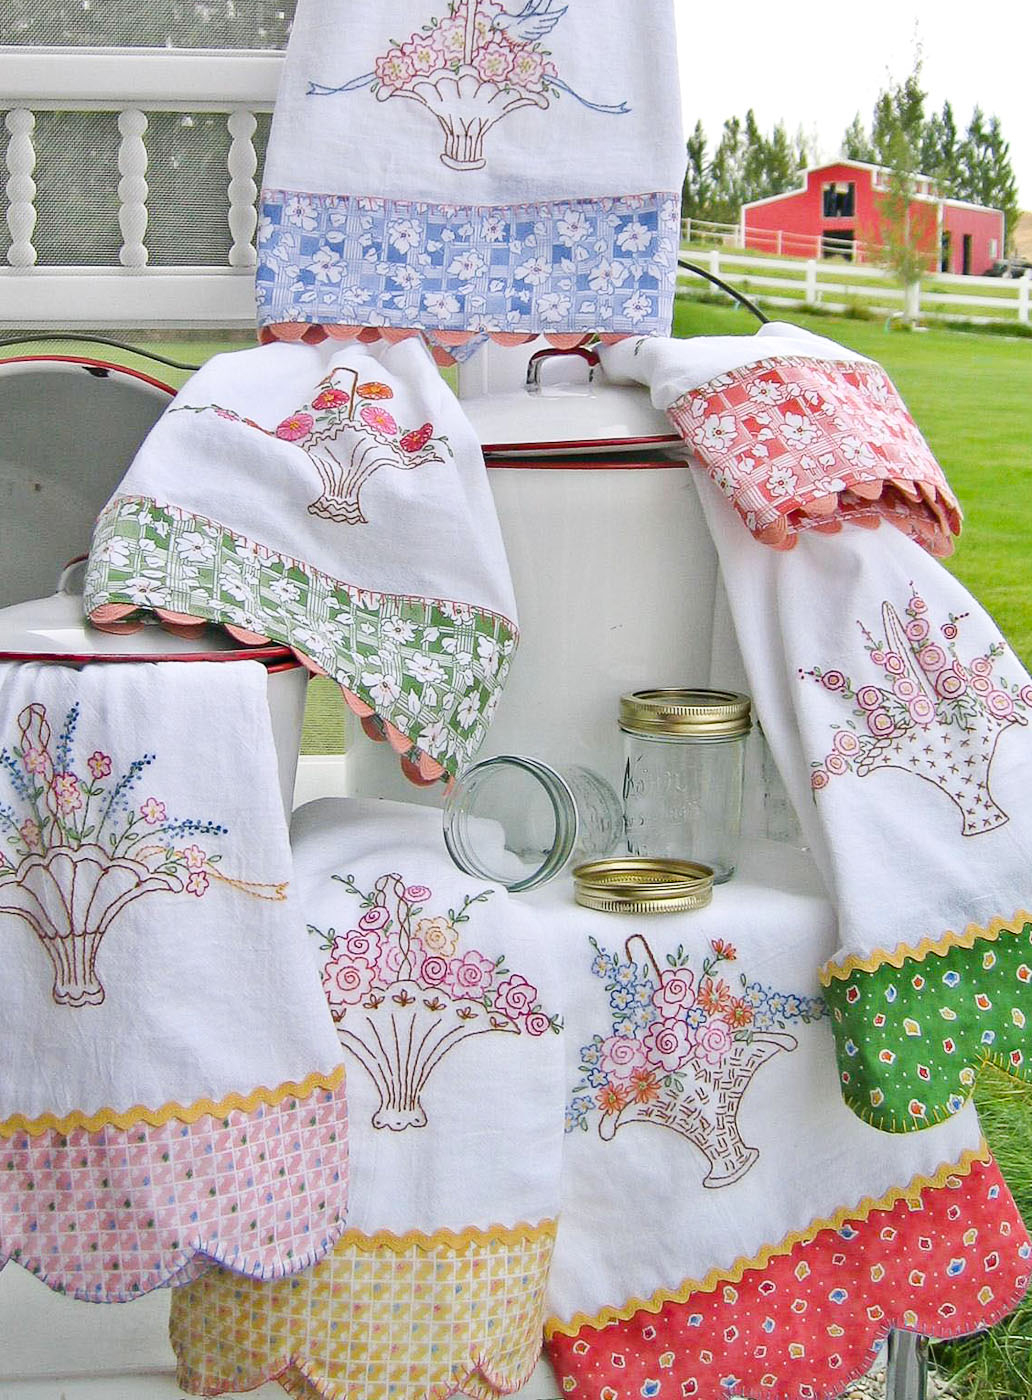 Kitchen Towel Embroidery Designs: Adding a Touch of Charm to Your Kitchen